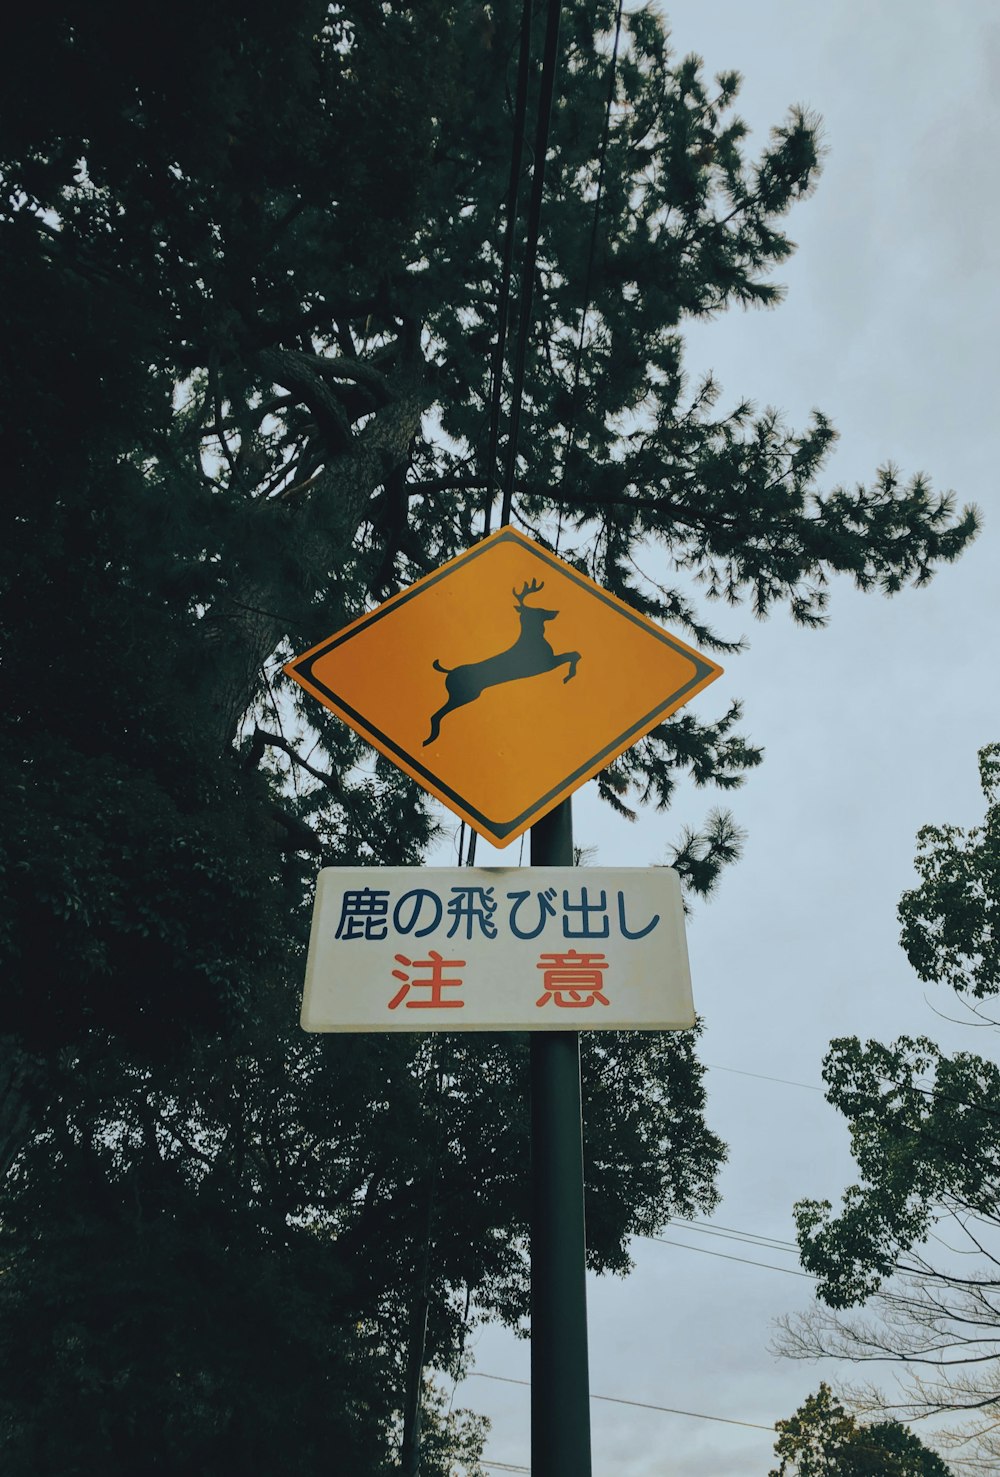 a street sign with a deer on it